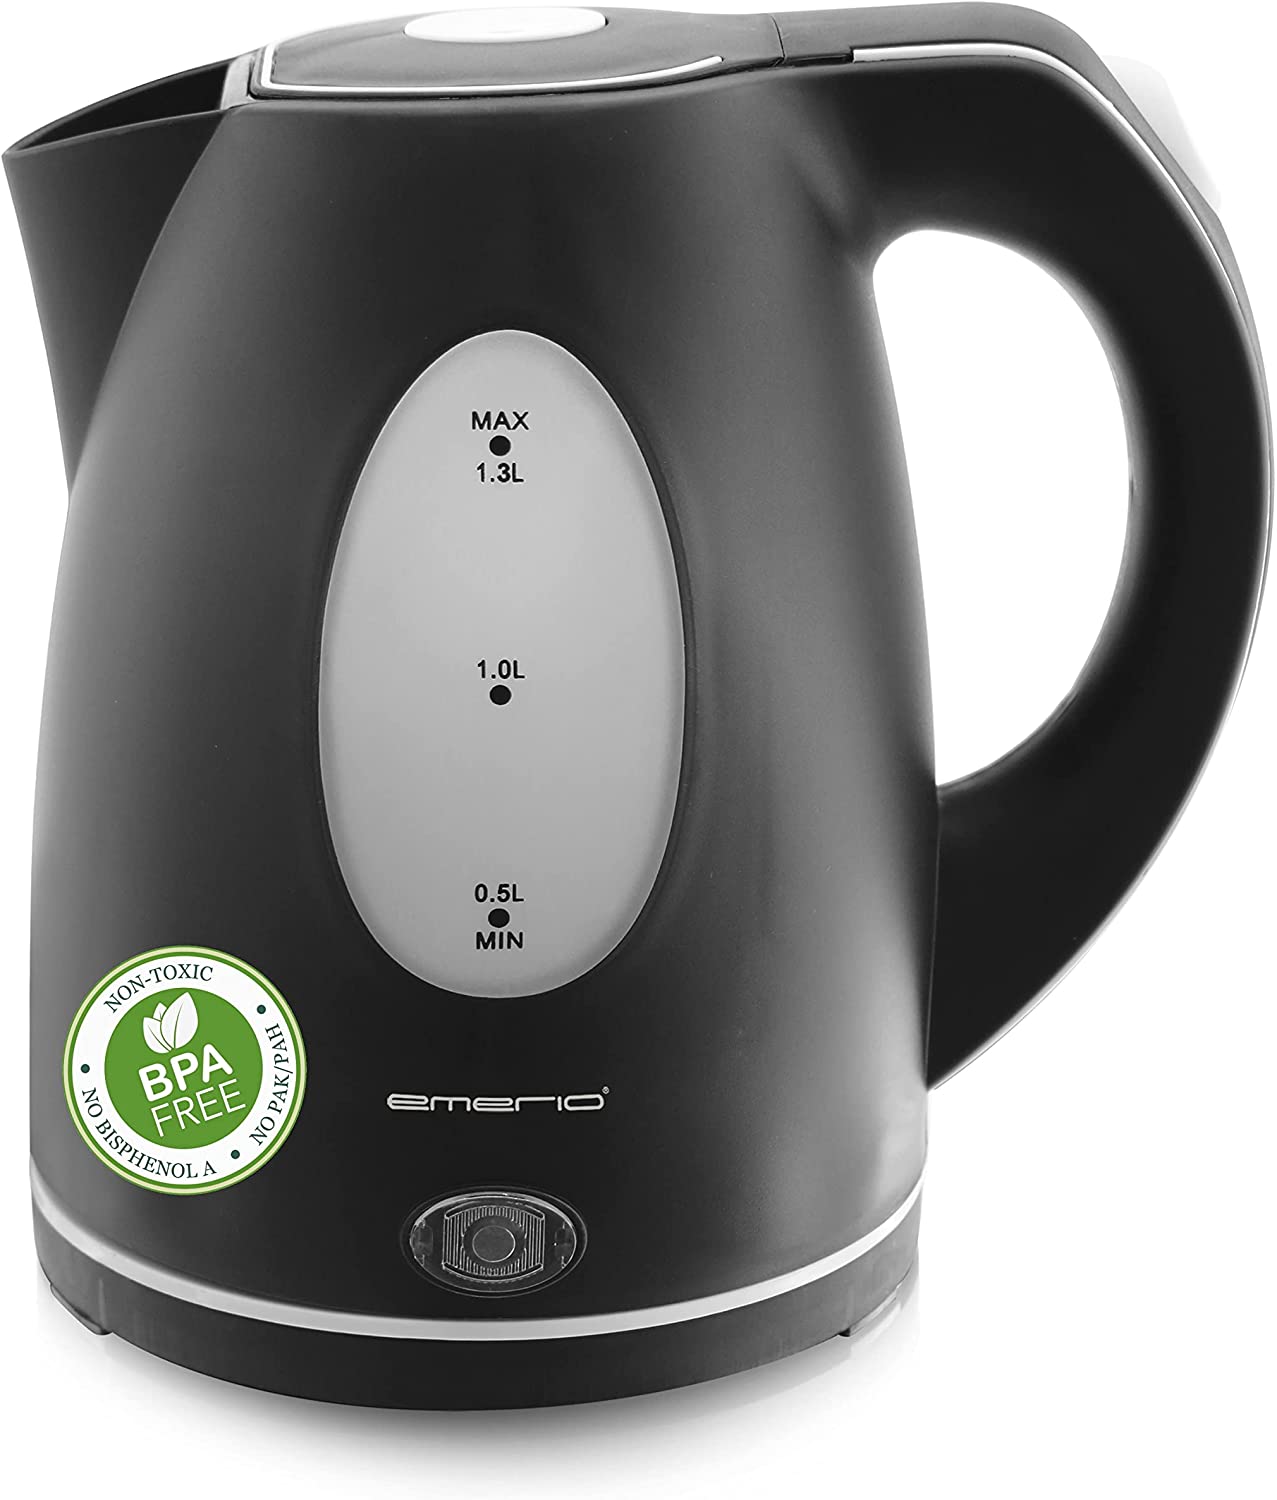 Emerio WK-106468.14 Kettle for Travel / Camping / Office with 2200 Watt, BPA-Free, Automatic Shut-Off with Dry Protection, 360° Base, Includes Limescale Filter, Black